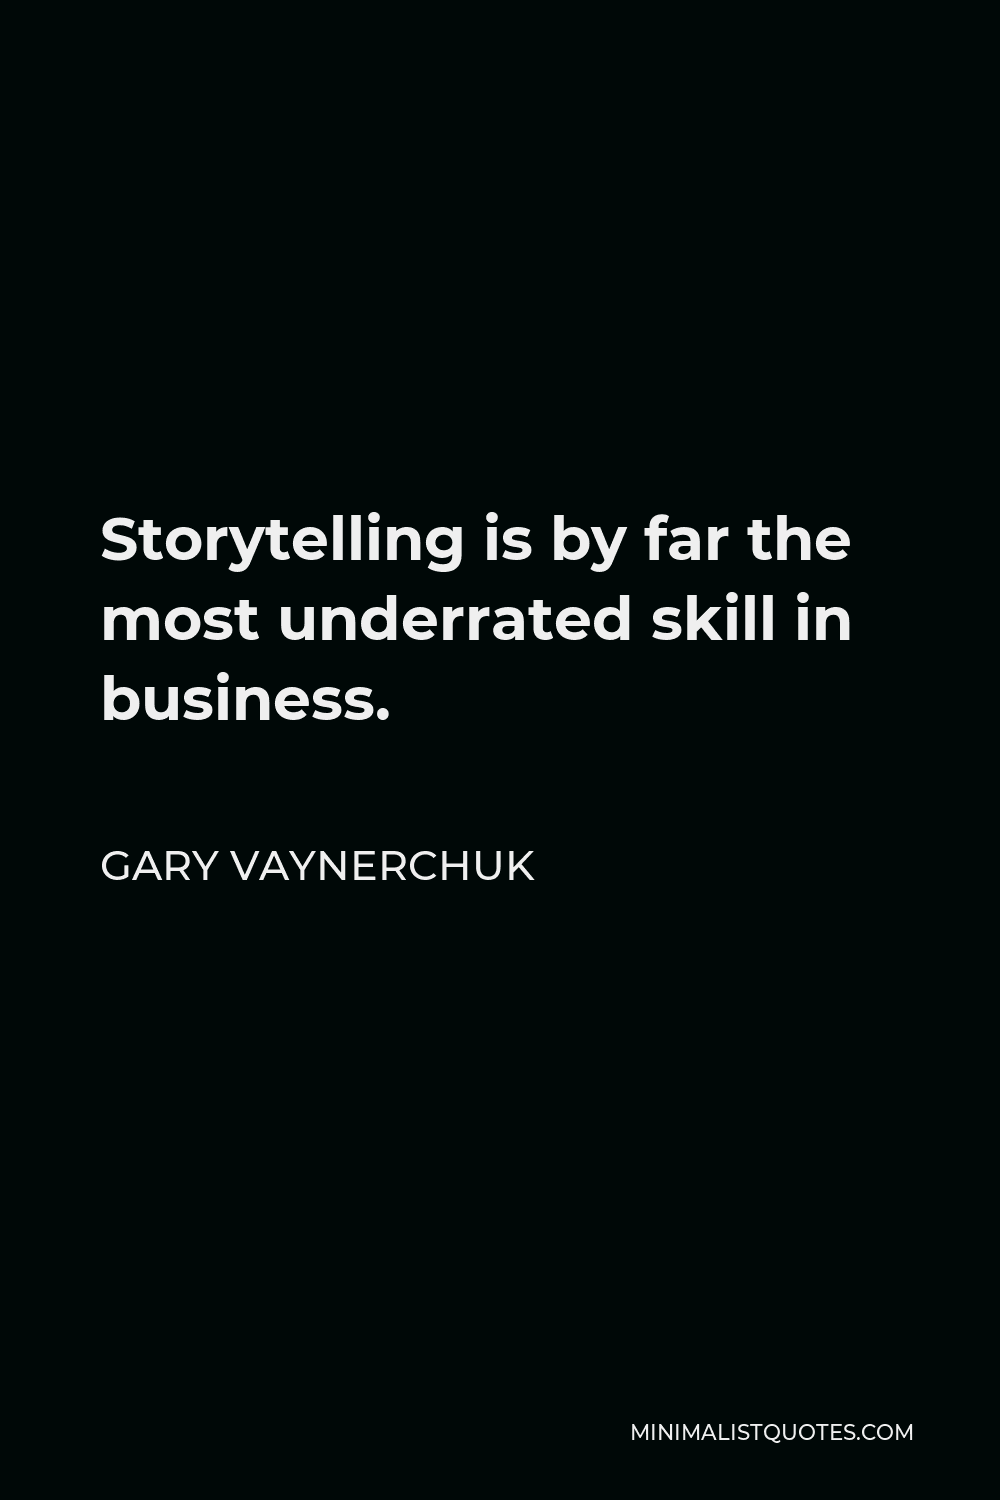 Gary Vaynerchuk Quote - Storytelling is by far the most underrated skill in business.